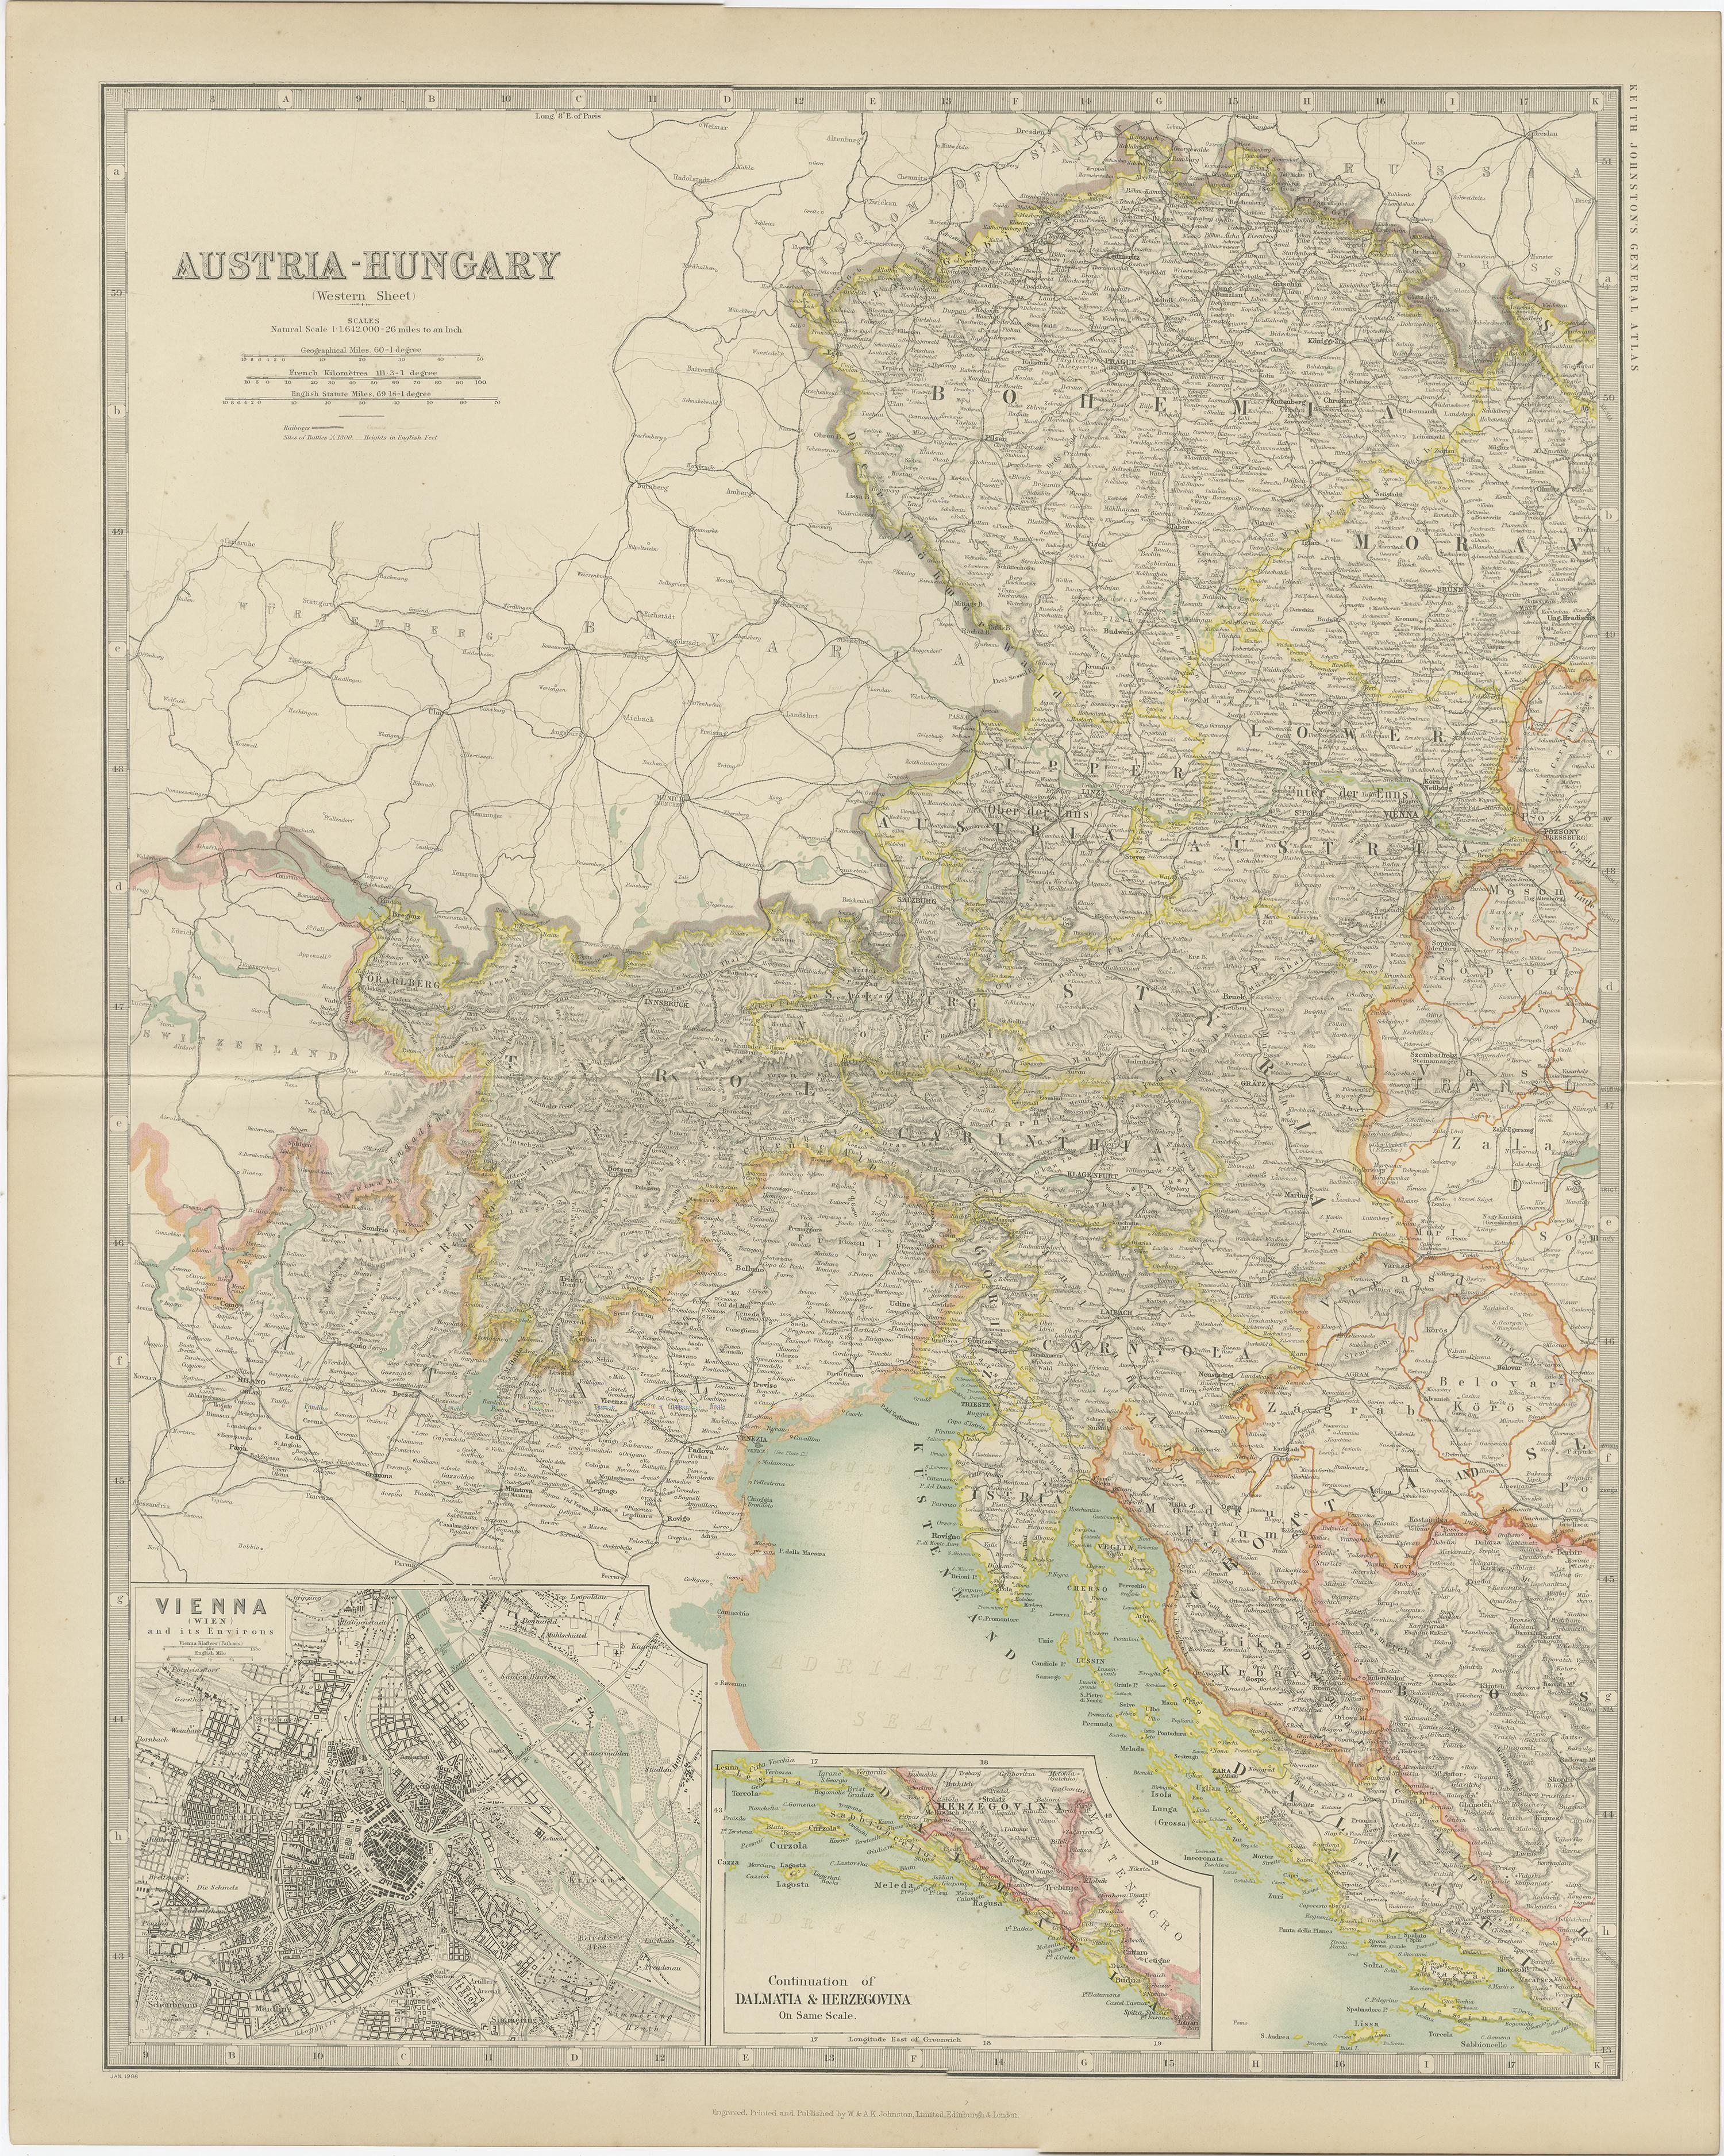 Antique map titled 'Austria- Hungary'. Original antique map of Austria- Hungary. With inset maps of Vienna, Dalmatia and Herzegovina. This map originates from the ‘Royal Atlas of Modern Geography’. Published by W. & A.K. Johnston, 1909.